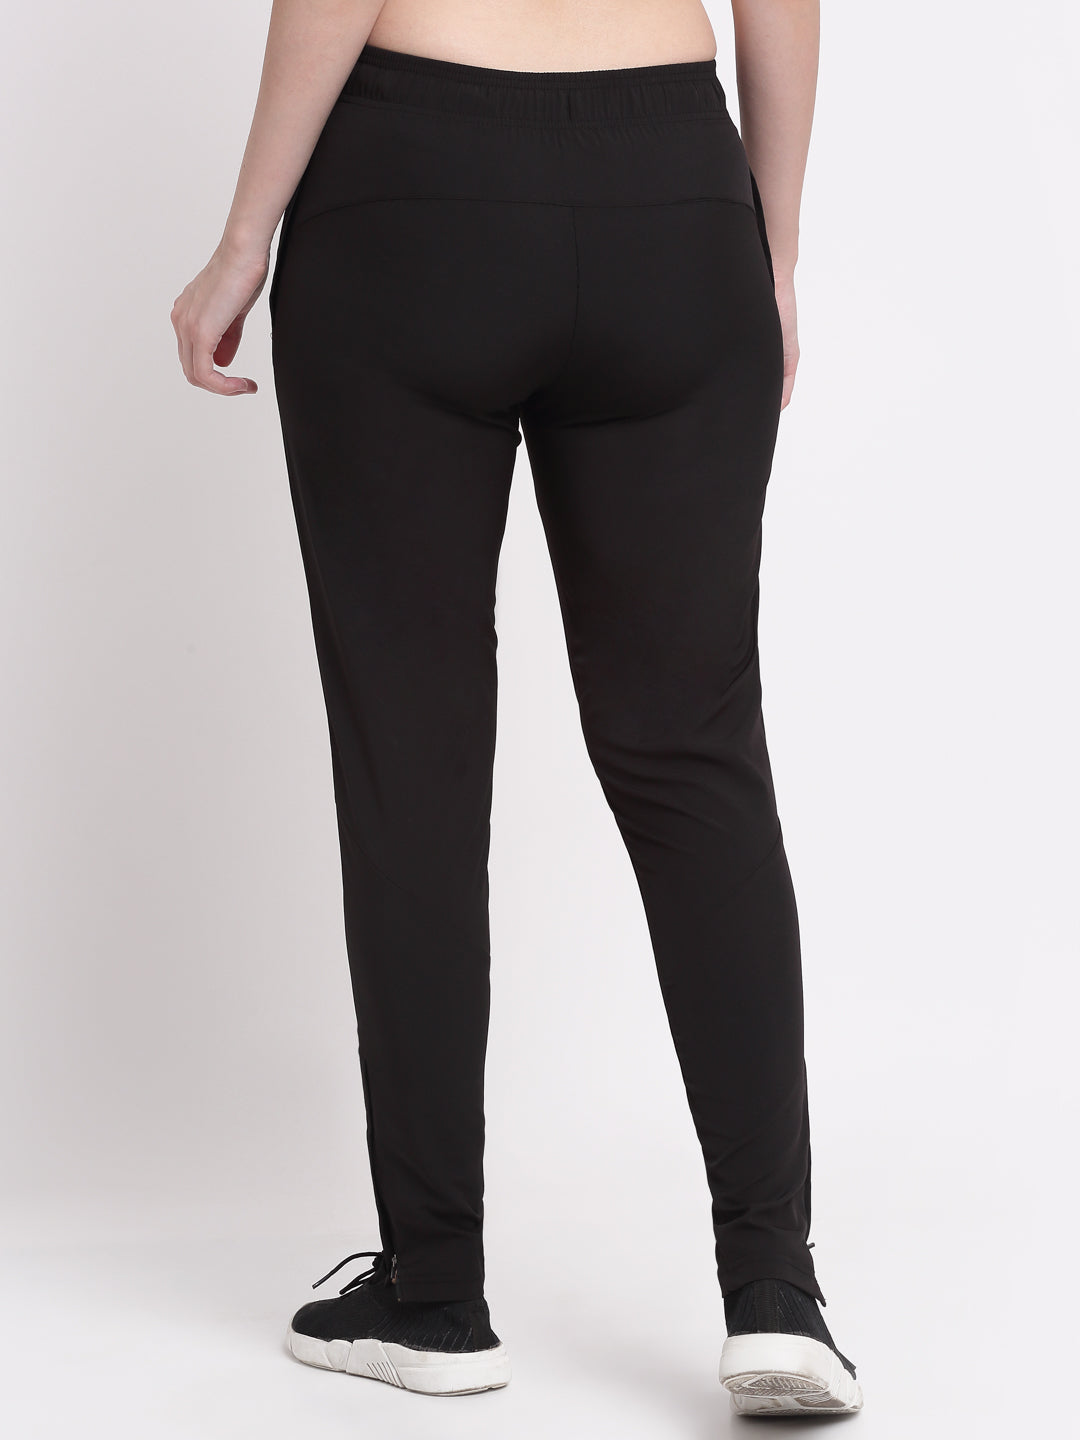 Workout Leggings for Women & Workout Pants | OFFLINE by Aerie